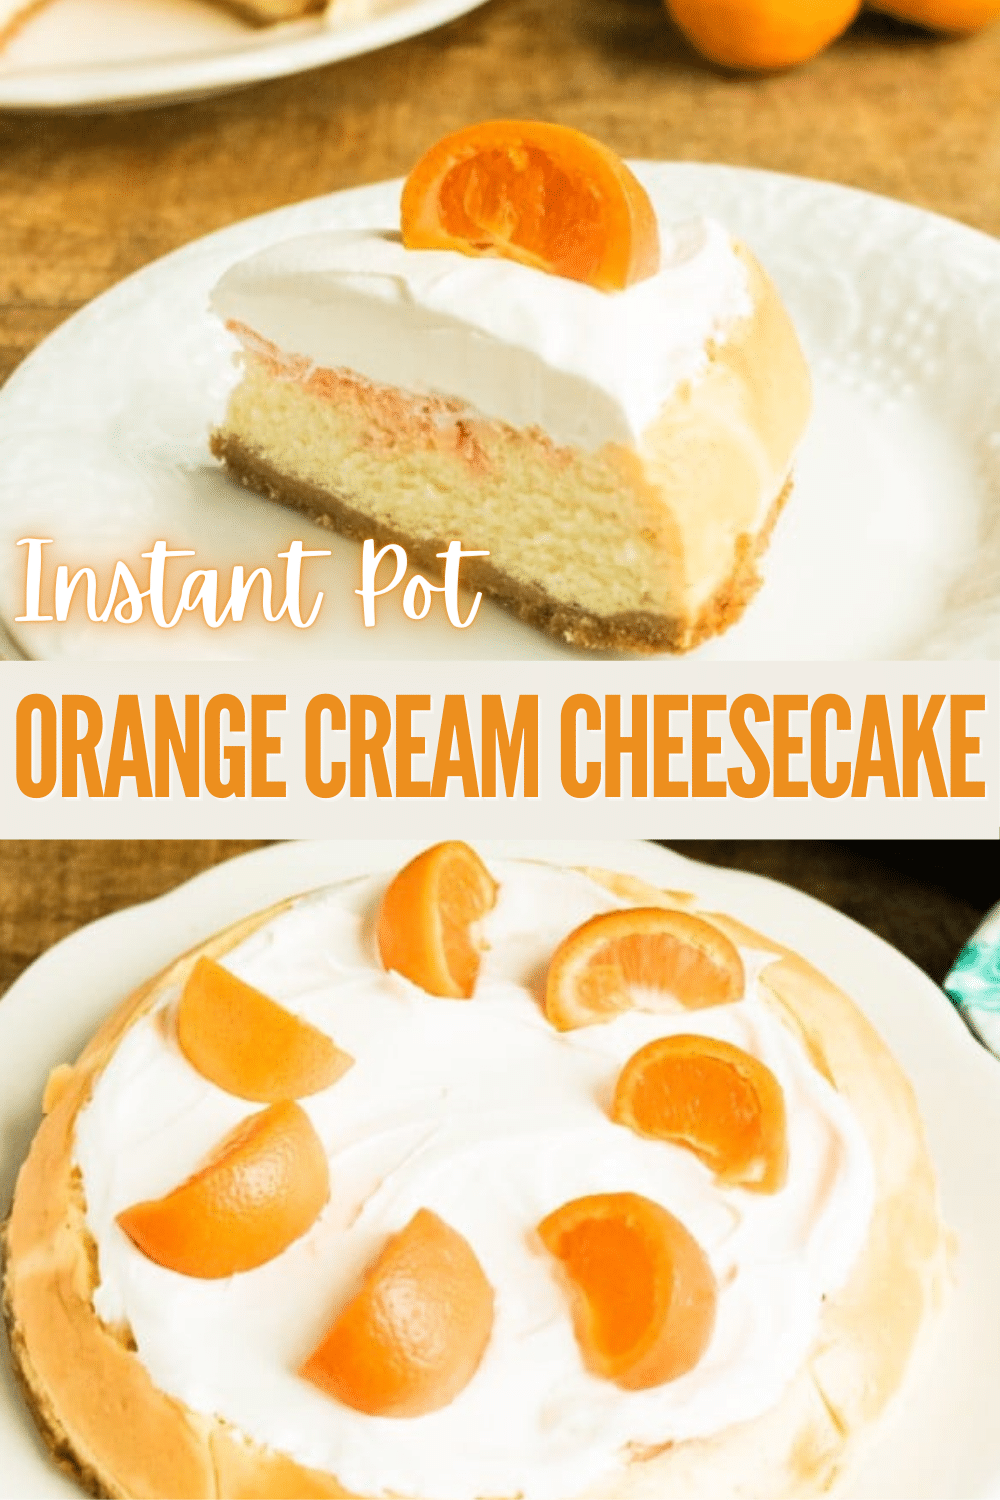 This Instant Pot Orange Cream Cheesecake has a fresh, light flavor that is perfect for warmer weather! Plus, the colorful orange garnish makes it just as pretty as it is delicious! #cheesecake #instantpot #pressurecooker #orangecream via @wondermomwannab